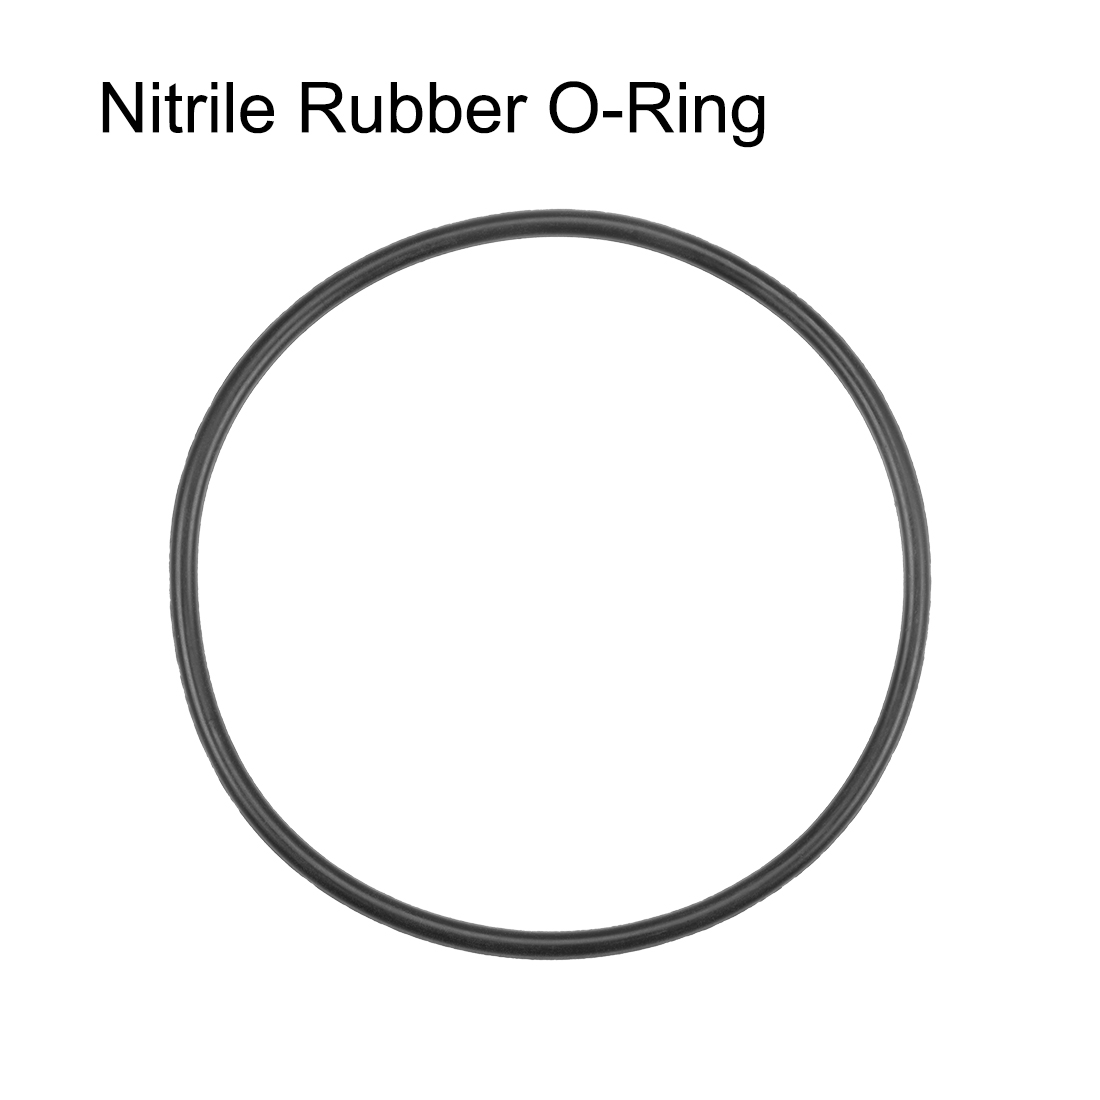 Unique Bargains O-Rings Nitrile Rubber 62mm x 67.3mm x 2.65mm Round Seal Gasket